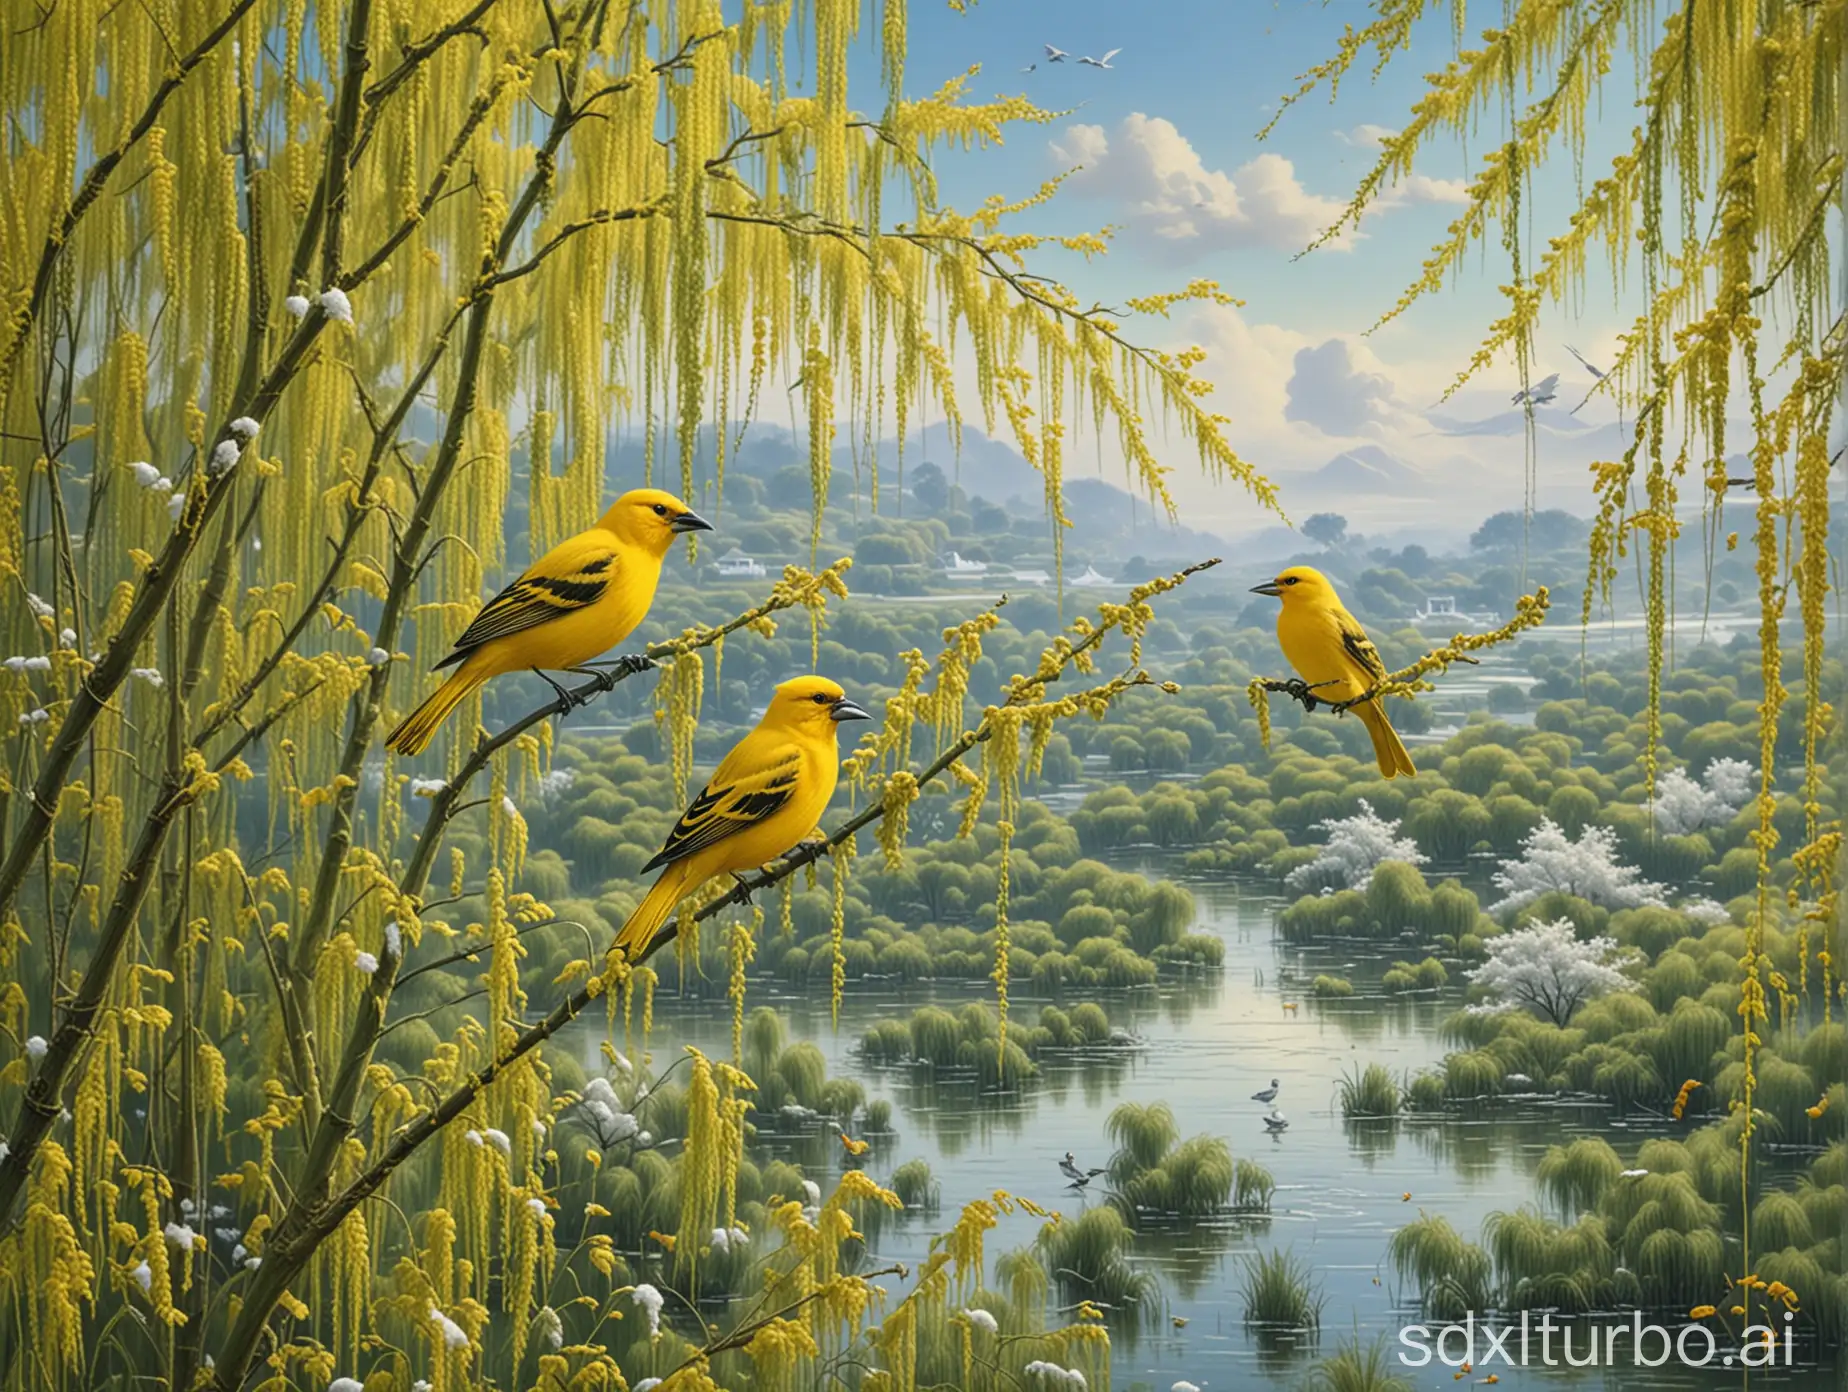 Singing-Orioles-and-Egrets-in-Scenic-Landscape